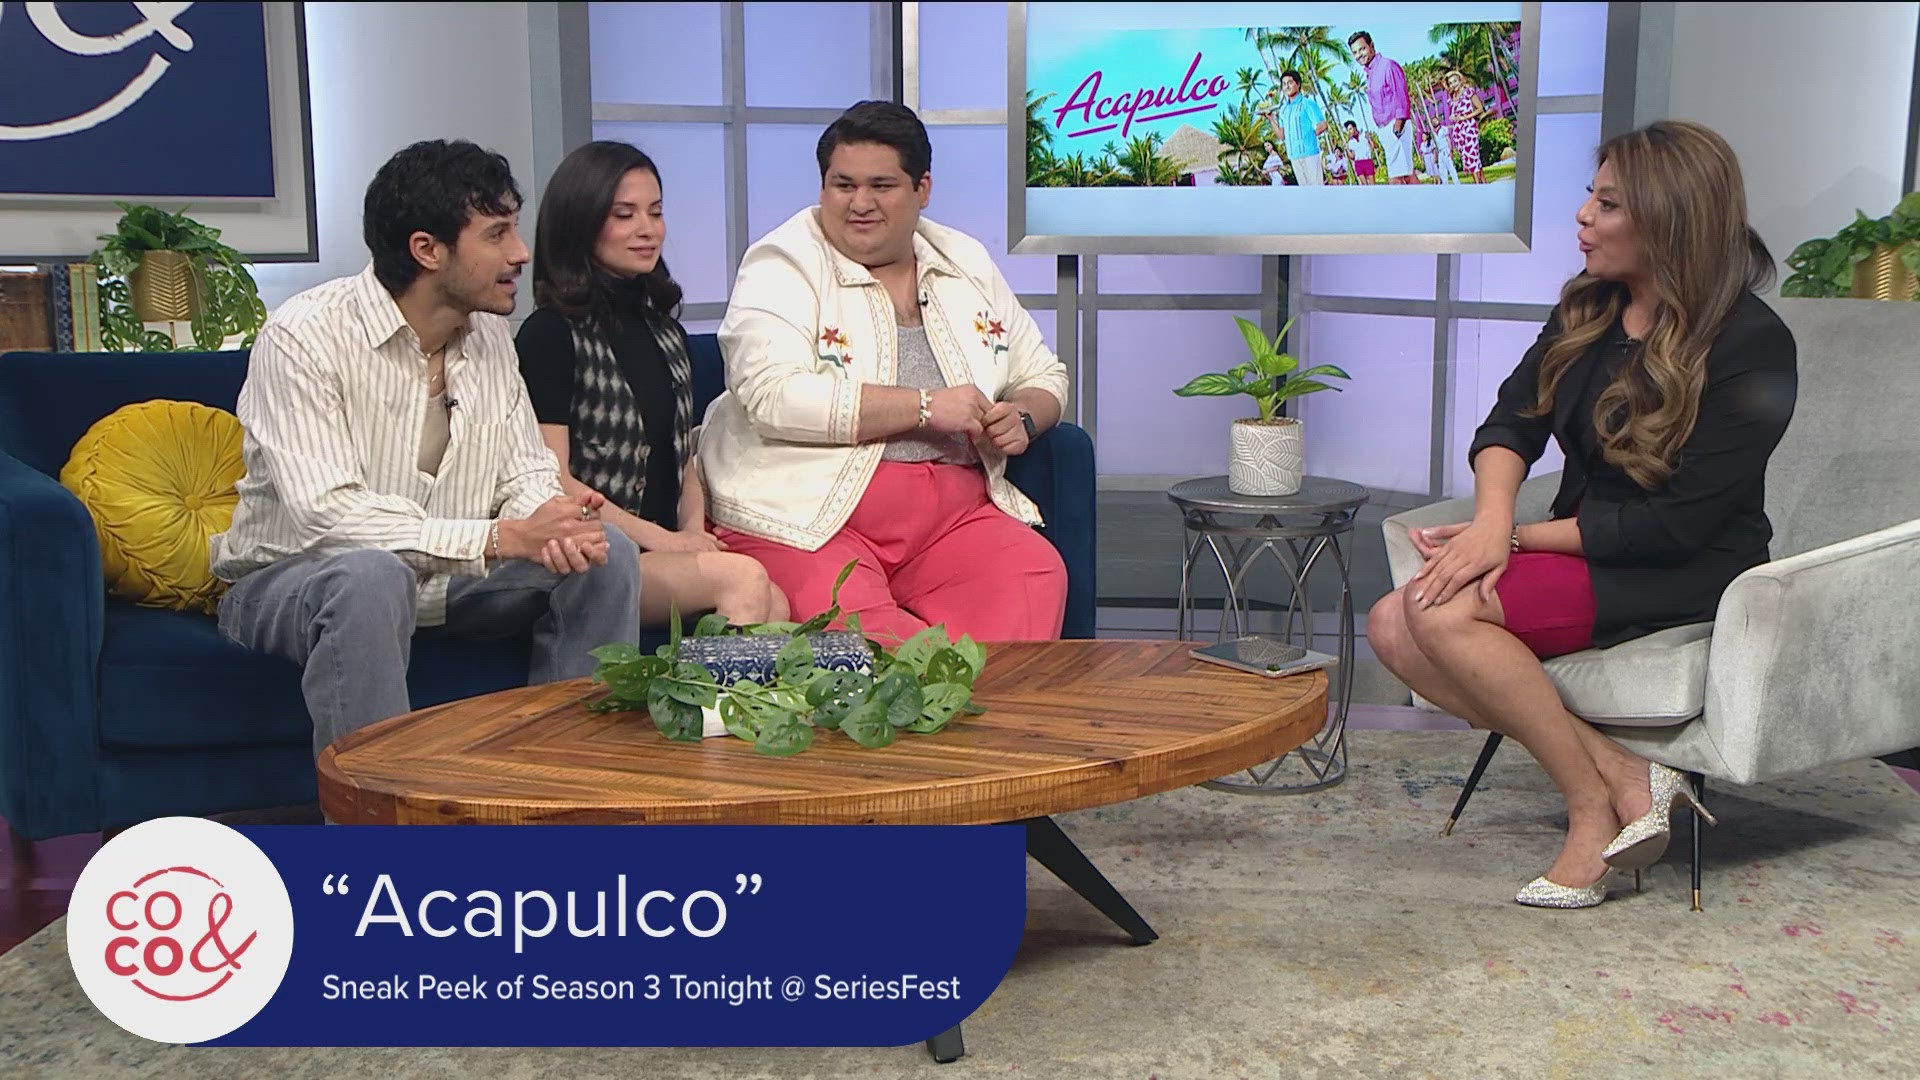 Get a sneak peek of S3 of Acapulco before it hits AppleTV Plus! Get a pass for the SeriesFest Premeire tonight at the Sie Film Center. Visit SeriesFest.com for more.